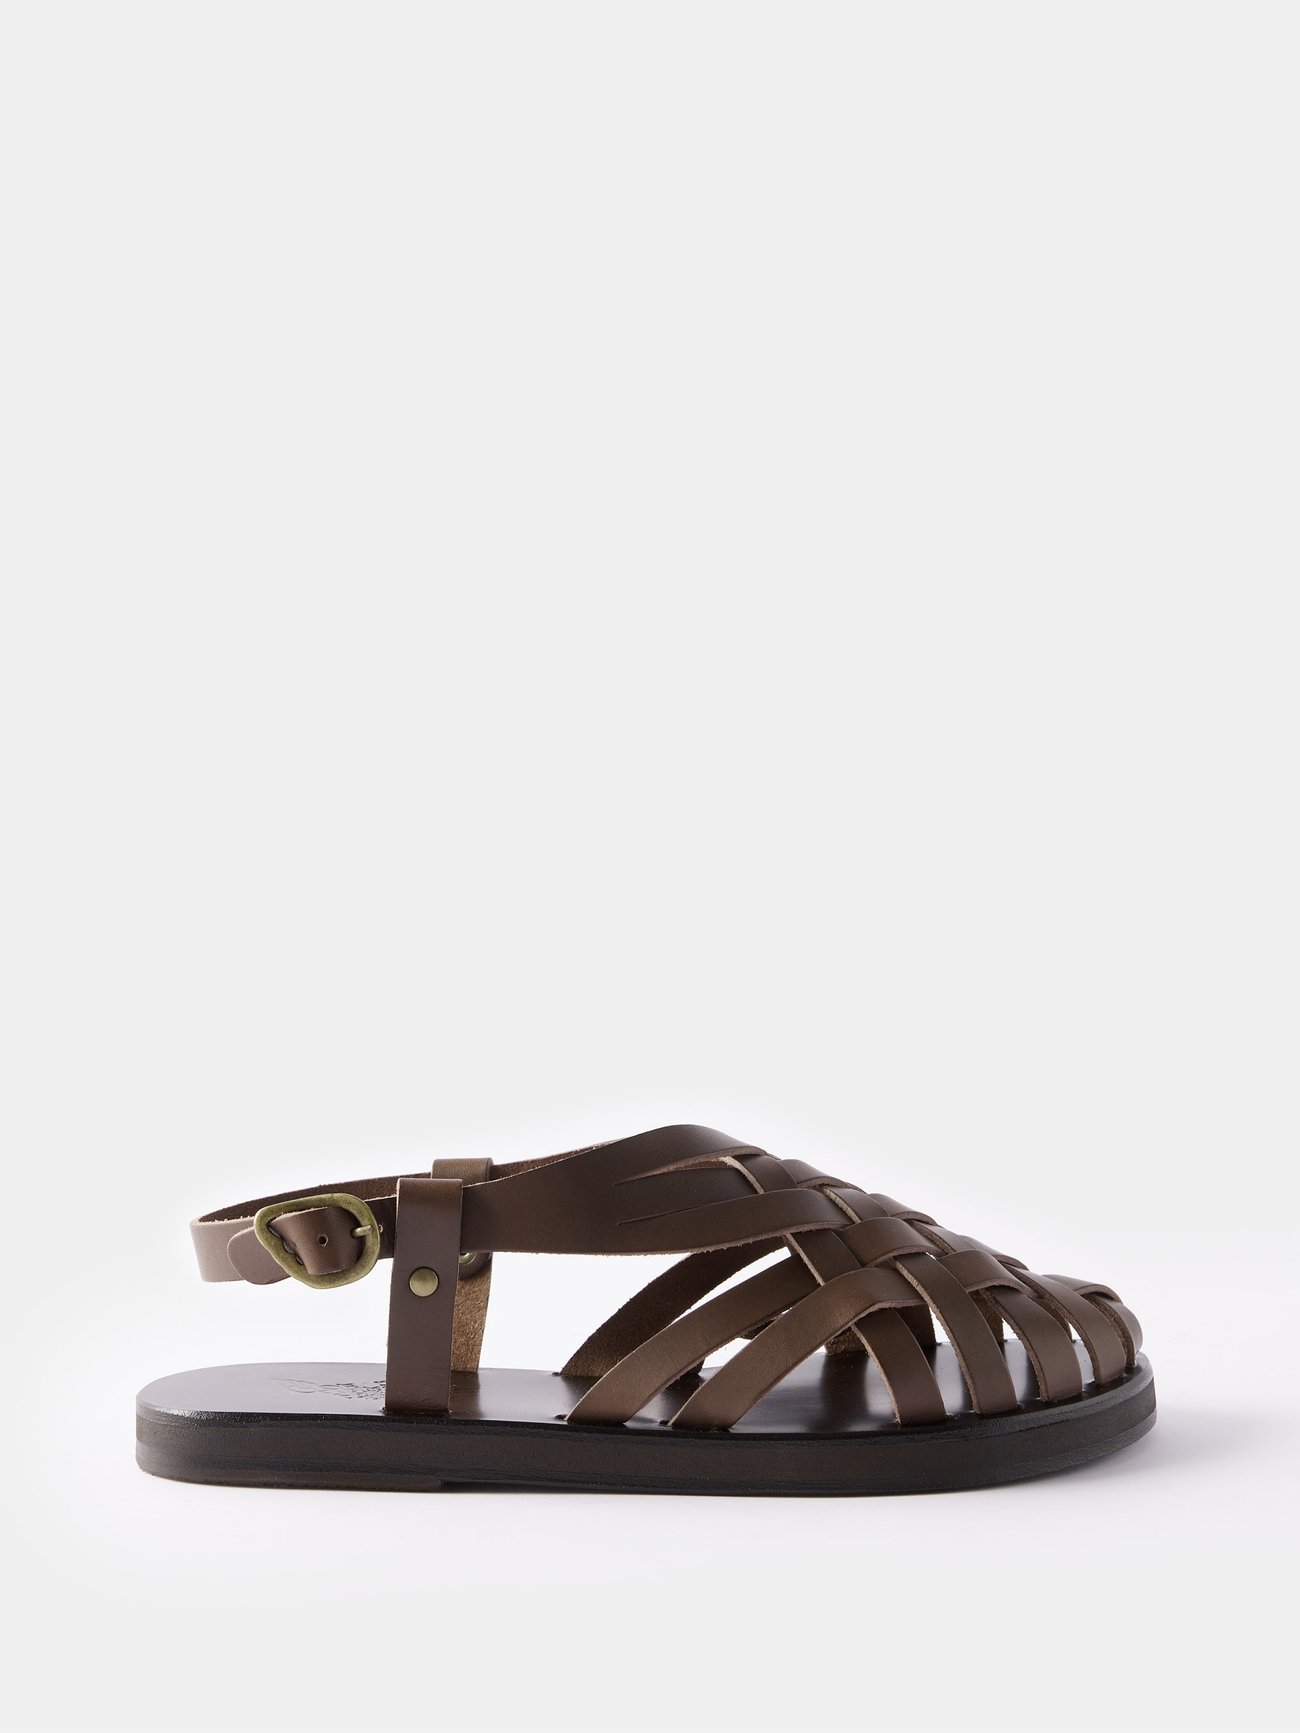 Leather sandals Ancient Greek Sandals Brown size 37 EU in Leather - 26326628